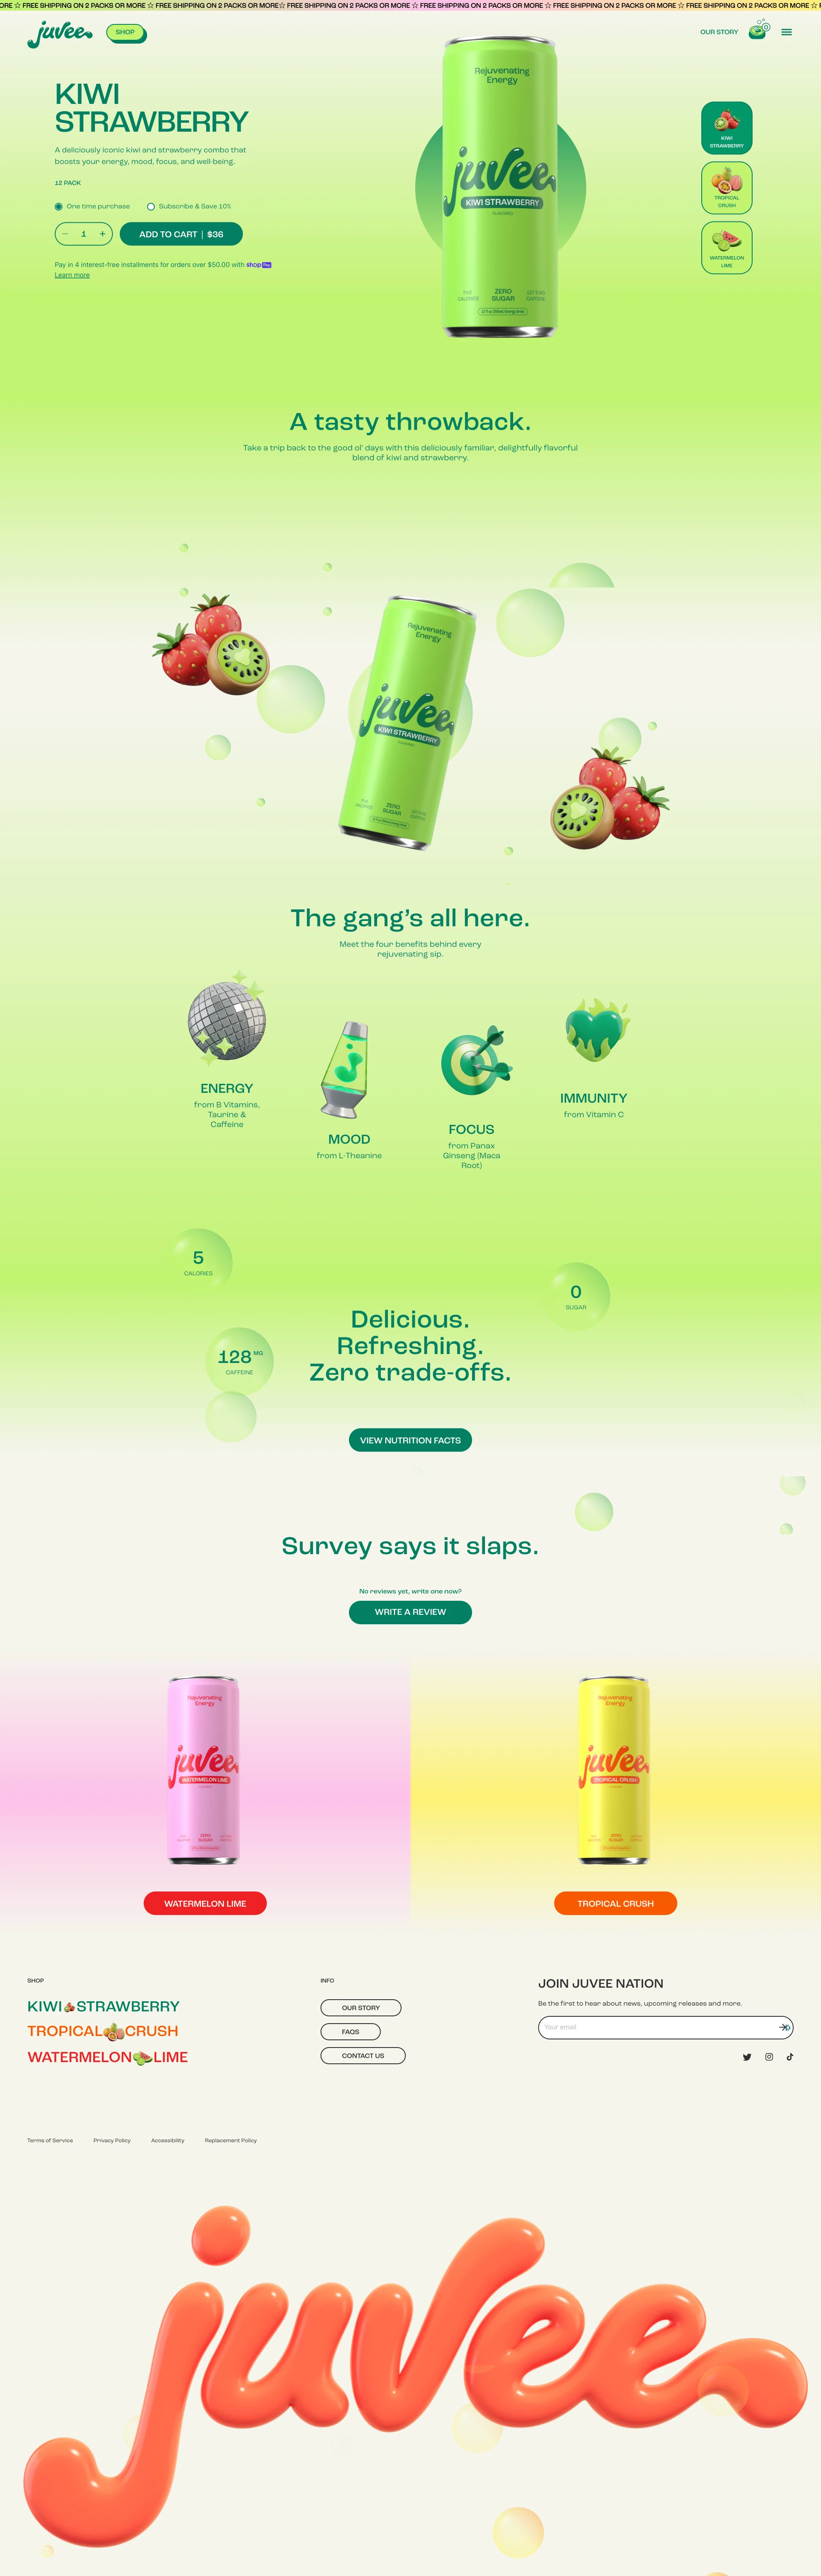 Juvee Landing Page Example: Meet Juvee, the rejuvenating energy drink for all! Power your play. 0g of sugar.